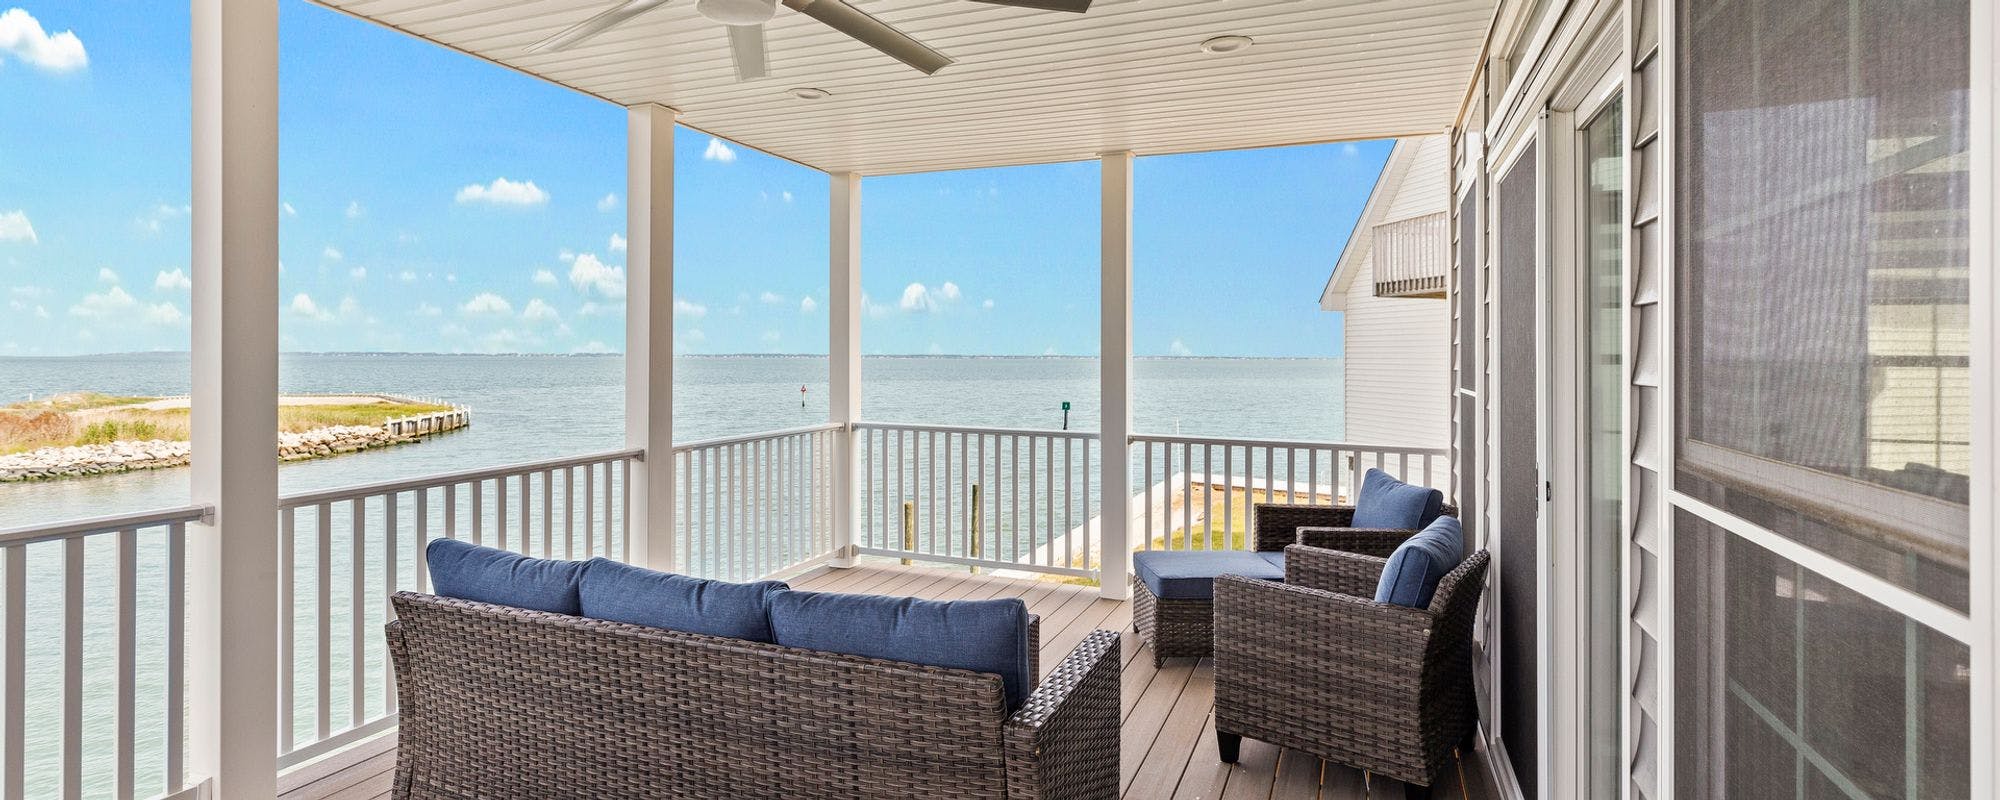 Outdoor space with views in Chincoteague, VA